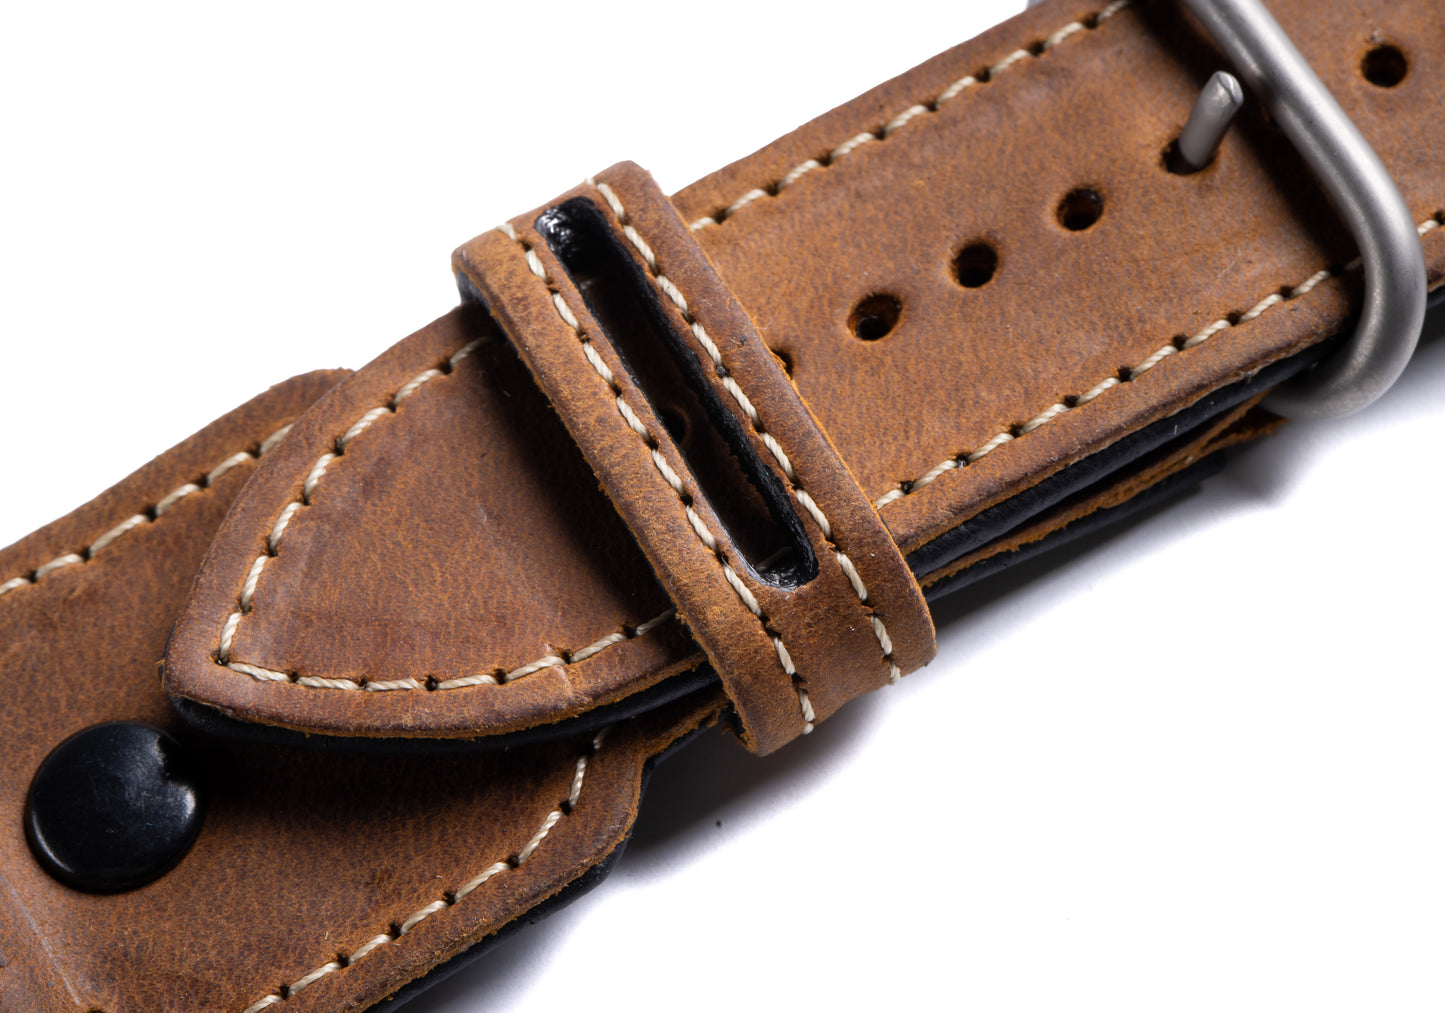 The Pilot Leather Strap For Apple Watch and Watch Ultra